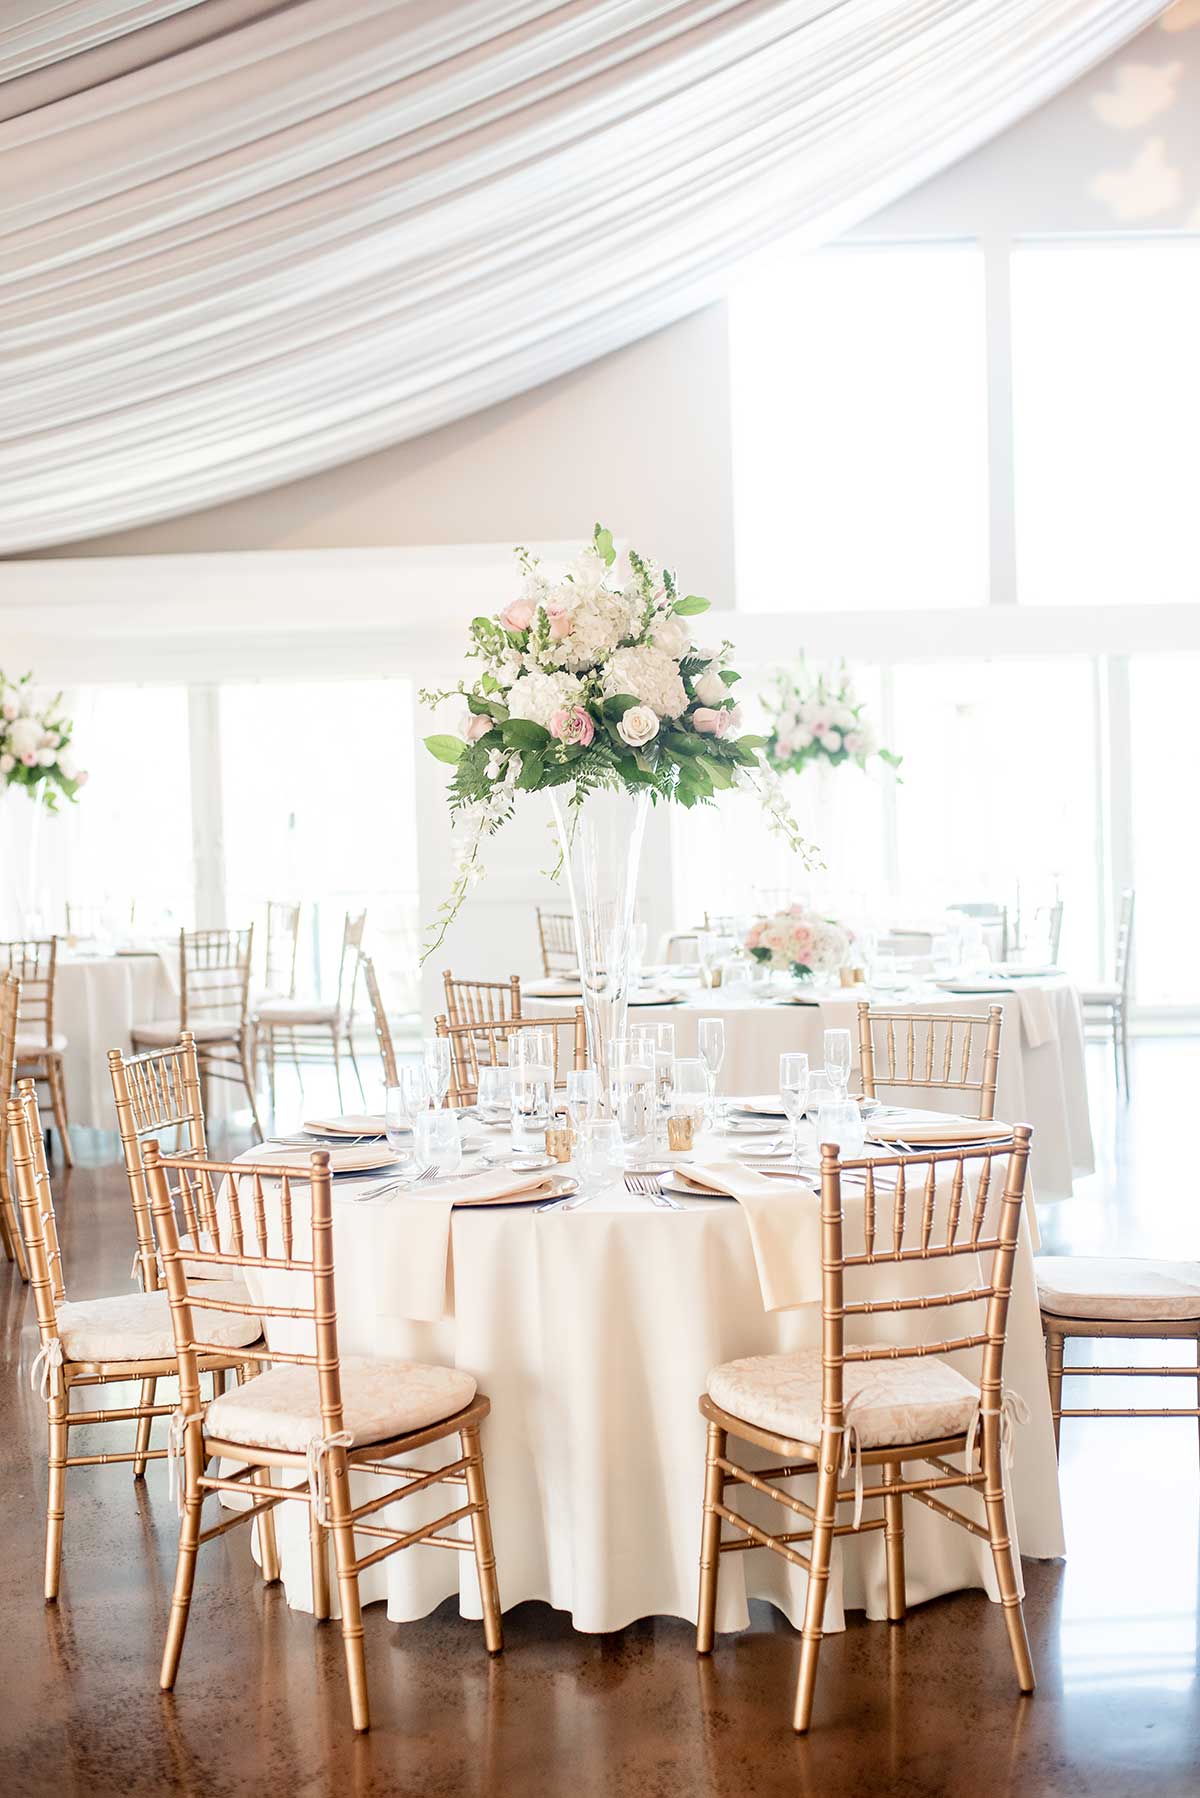 A wedding reception set up with white tables and chairs.